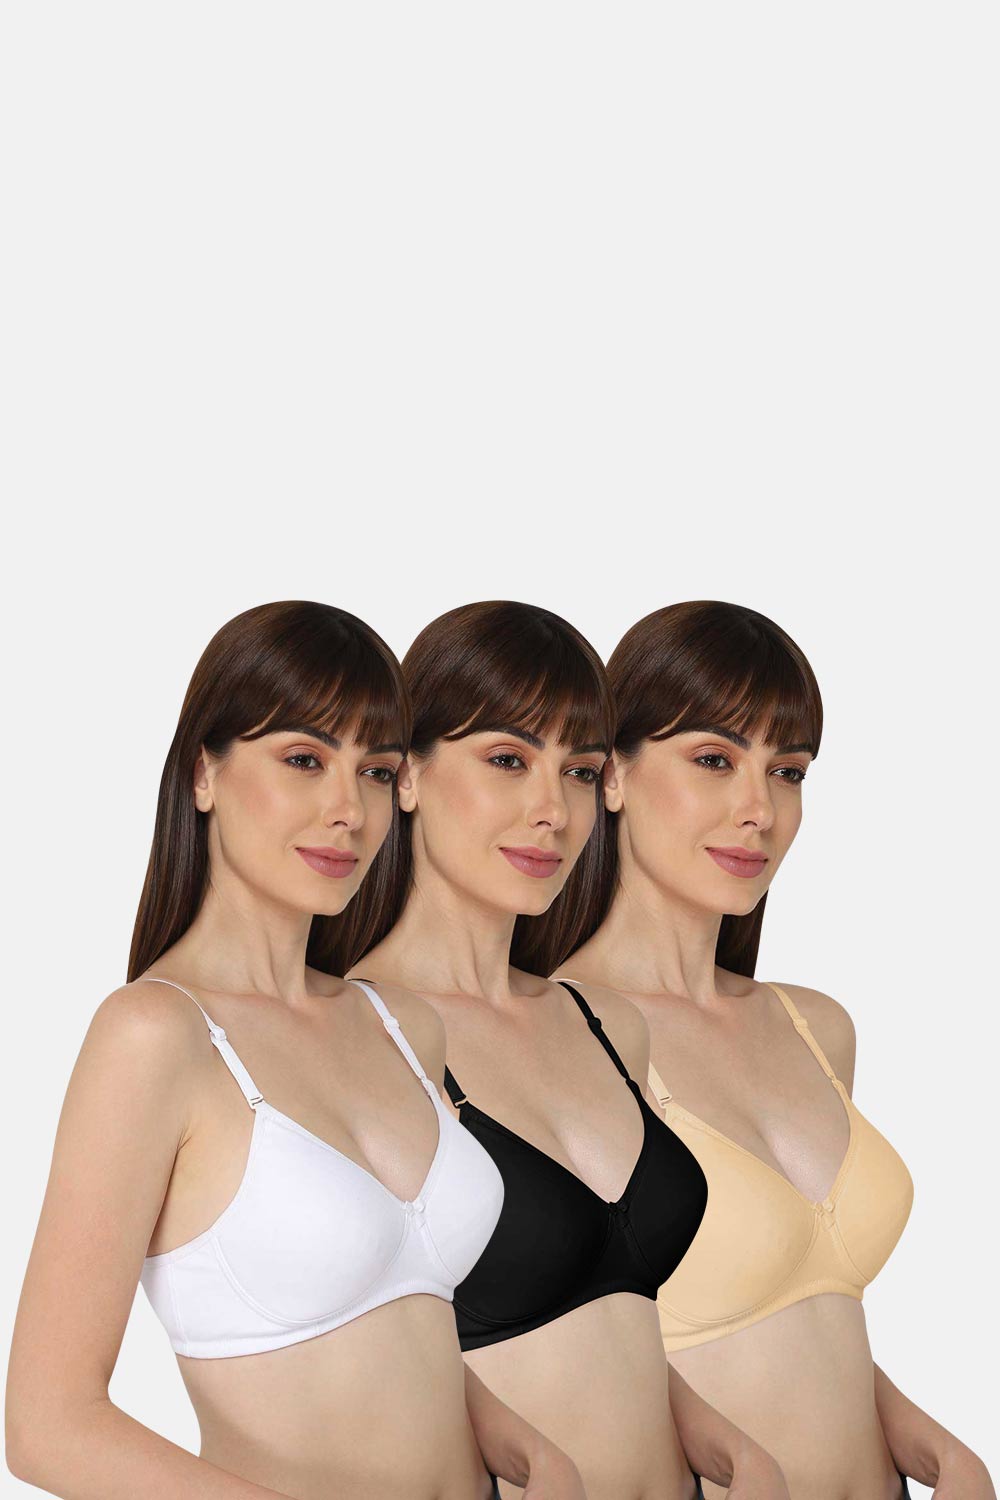 ATTIRE OUTFIT Women Push-up Heavily Padded Bra - Buy ATTIRE OUTFIT Women  Push-up Heavily Padded Bra Online at Best Prices in India